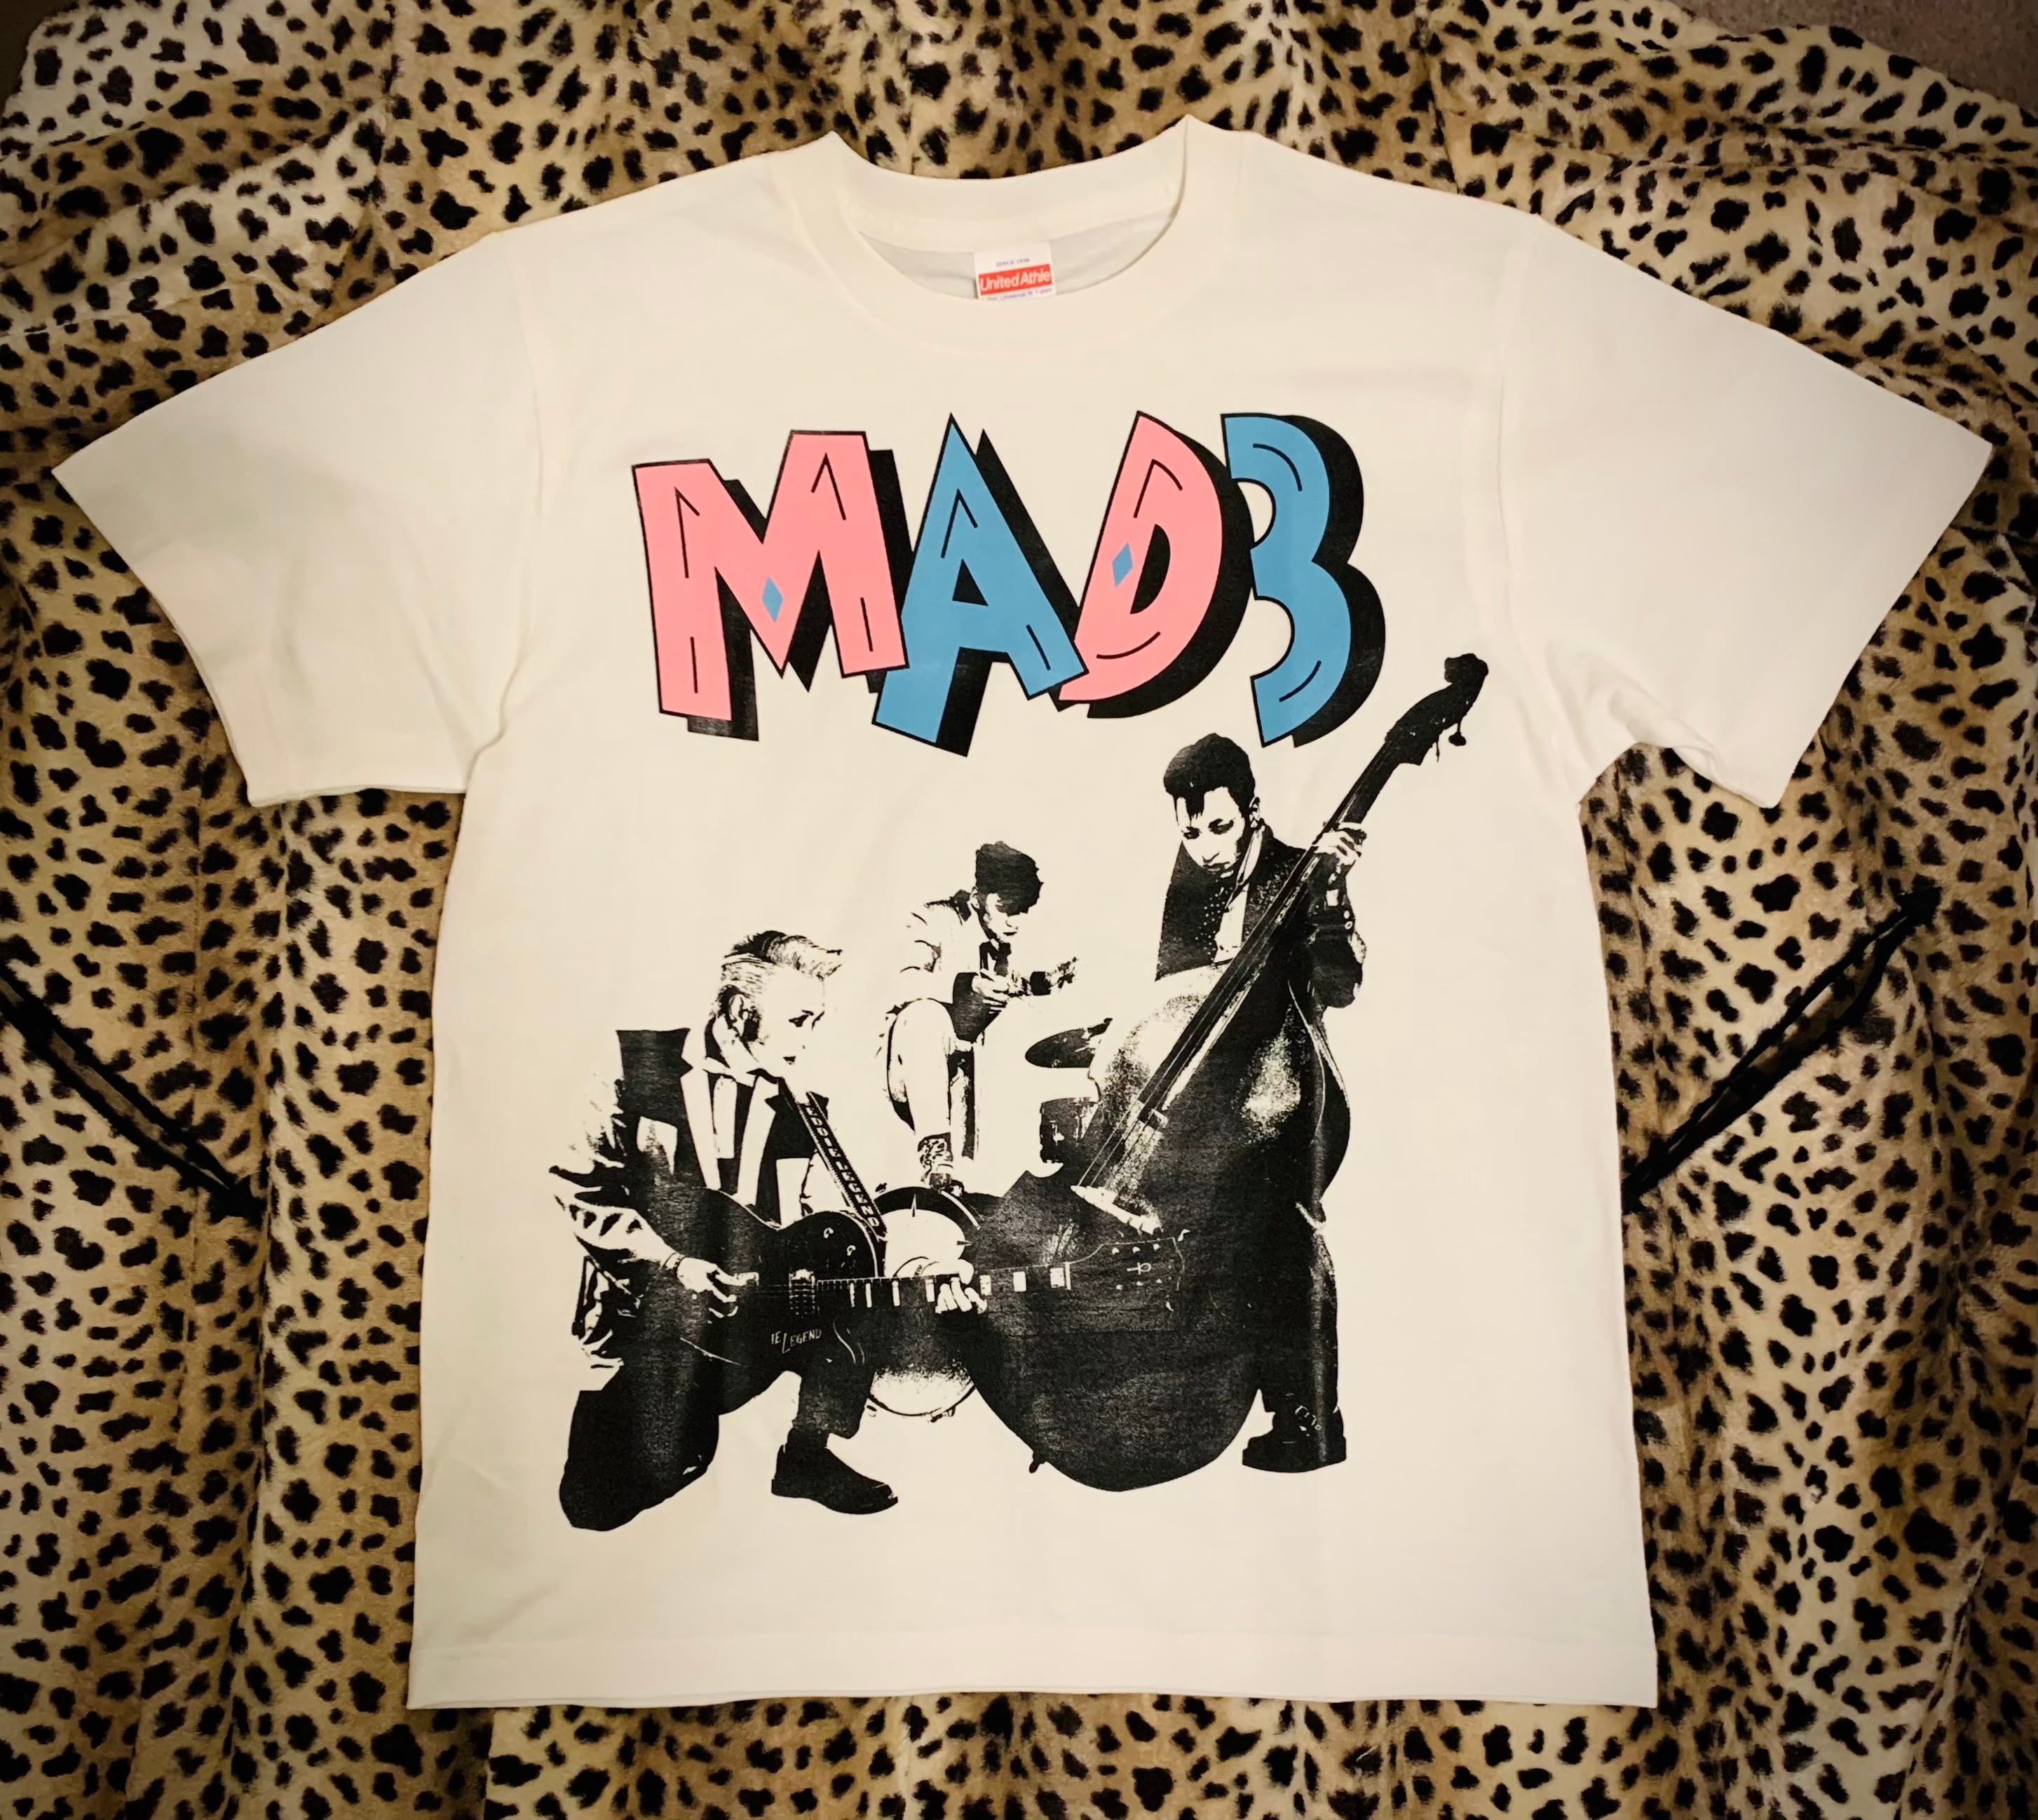 MAD3 “REAL COOL CATS” T-Shirt